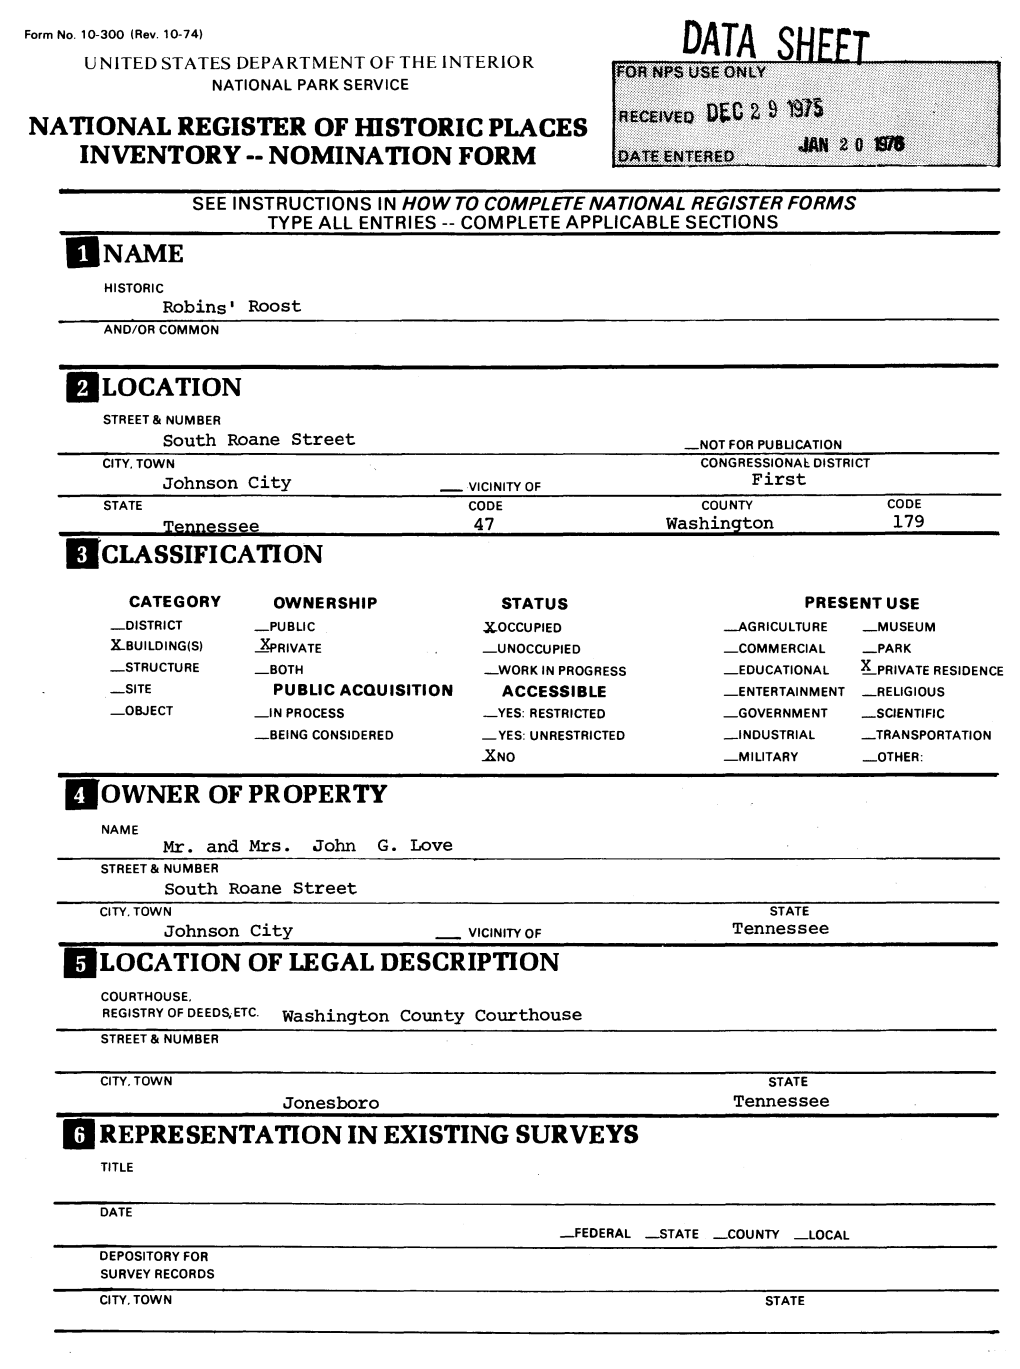 Data Sheet. National Park Service National Register of Historic Places Inventory - Nomination Form